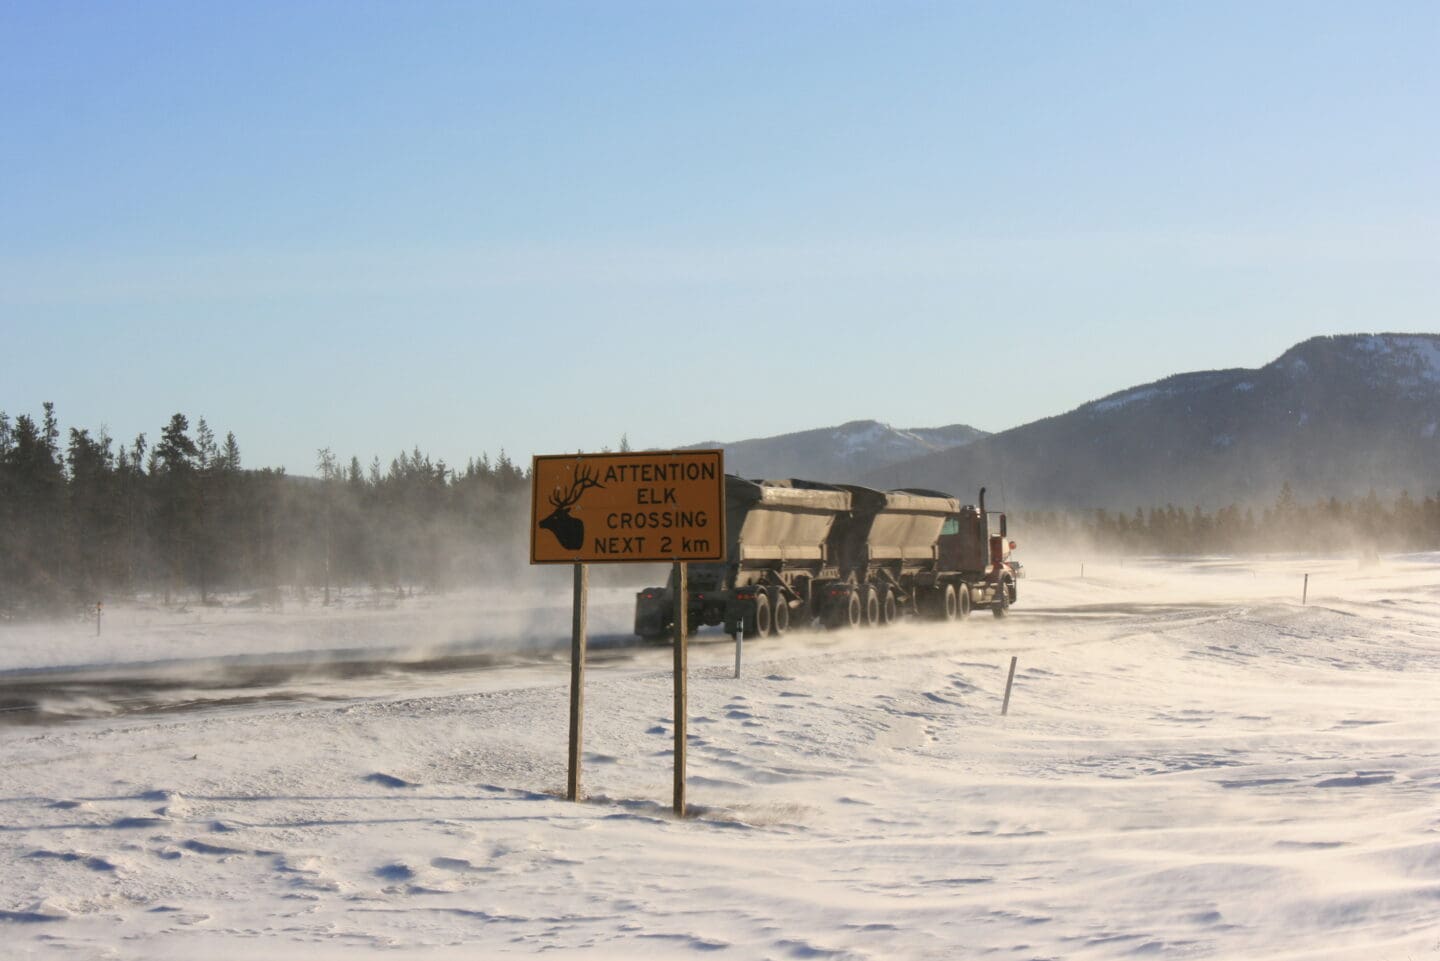 An image of a truck travelling on a windy snowy highway with a sign saying: Attention elk crossing next 2 km